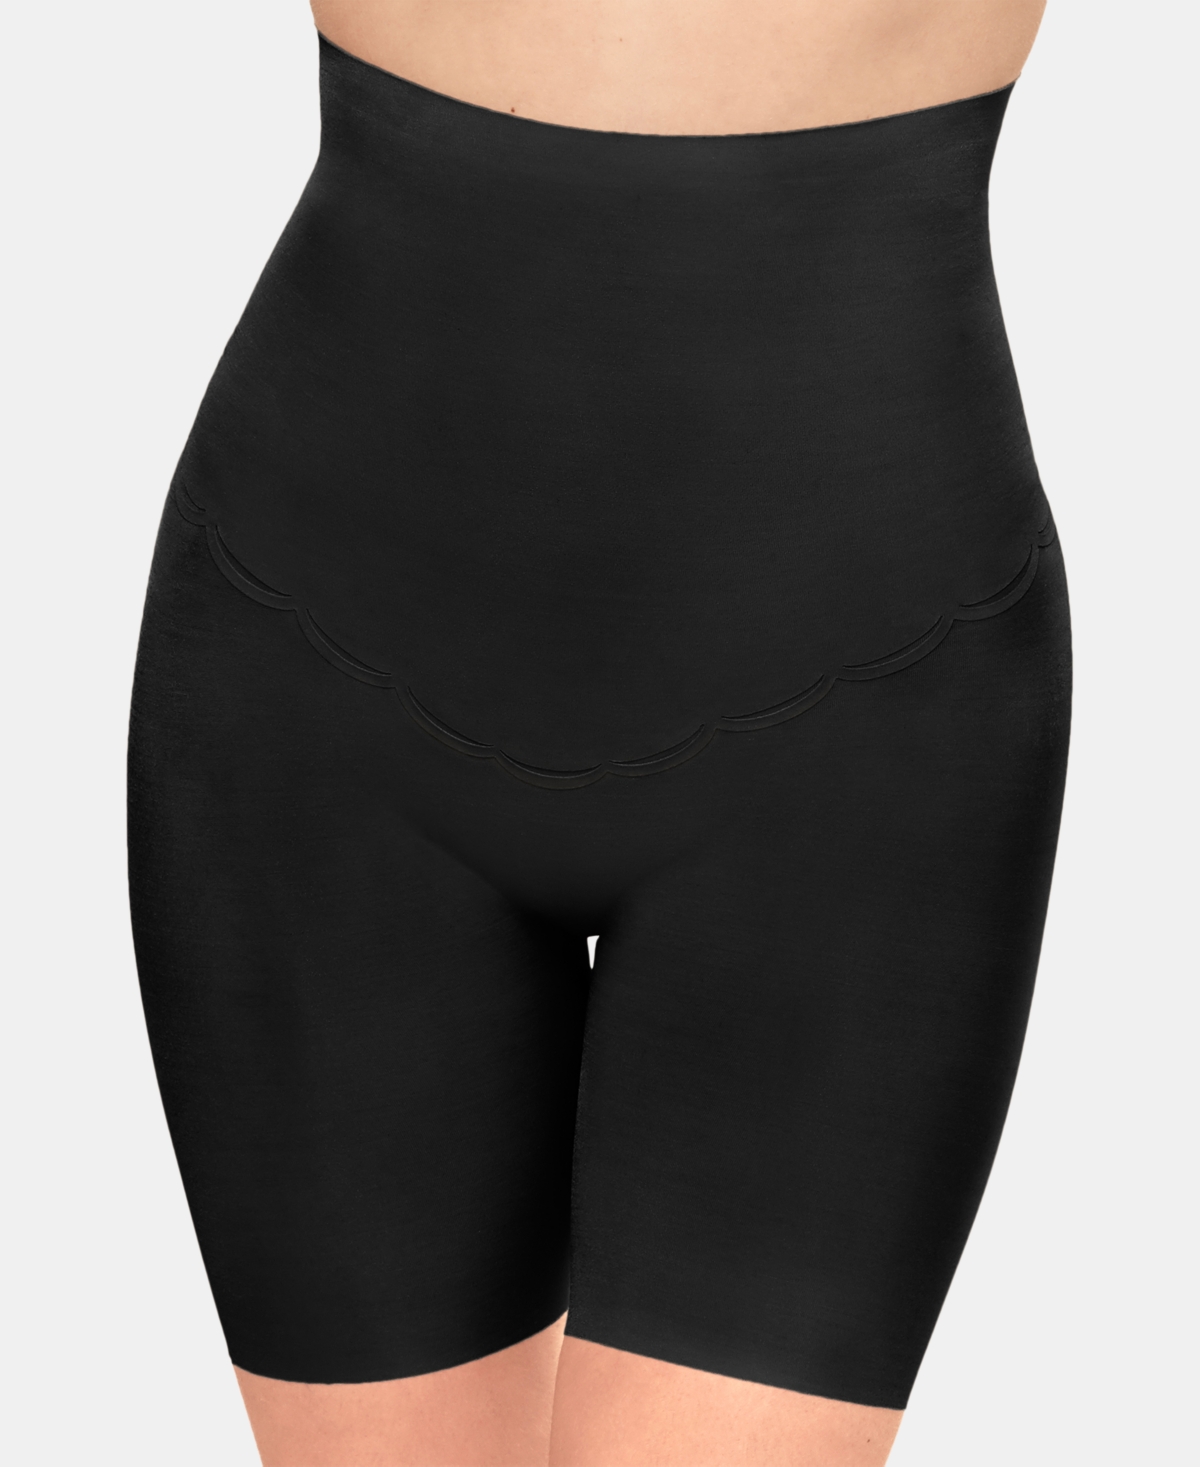 UPC 719544847063 product image for Wacoal Women's Inside Edit Firm Tummy-Control High Waist Thigh Slimmer 808307 | upcitemdb.com